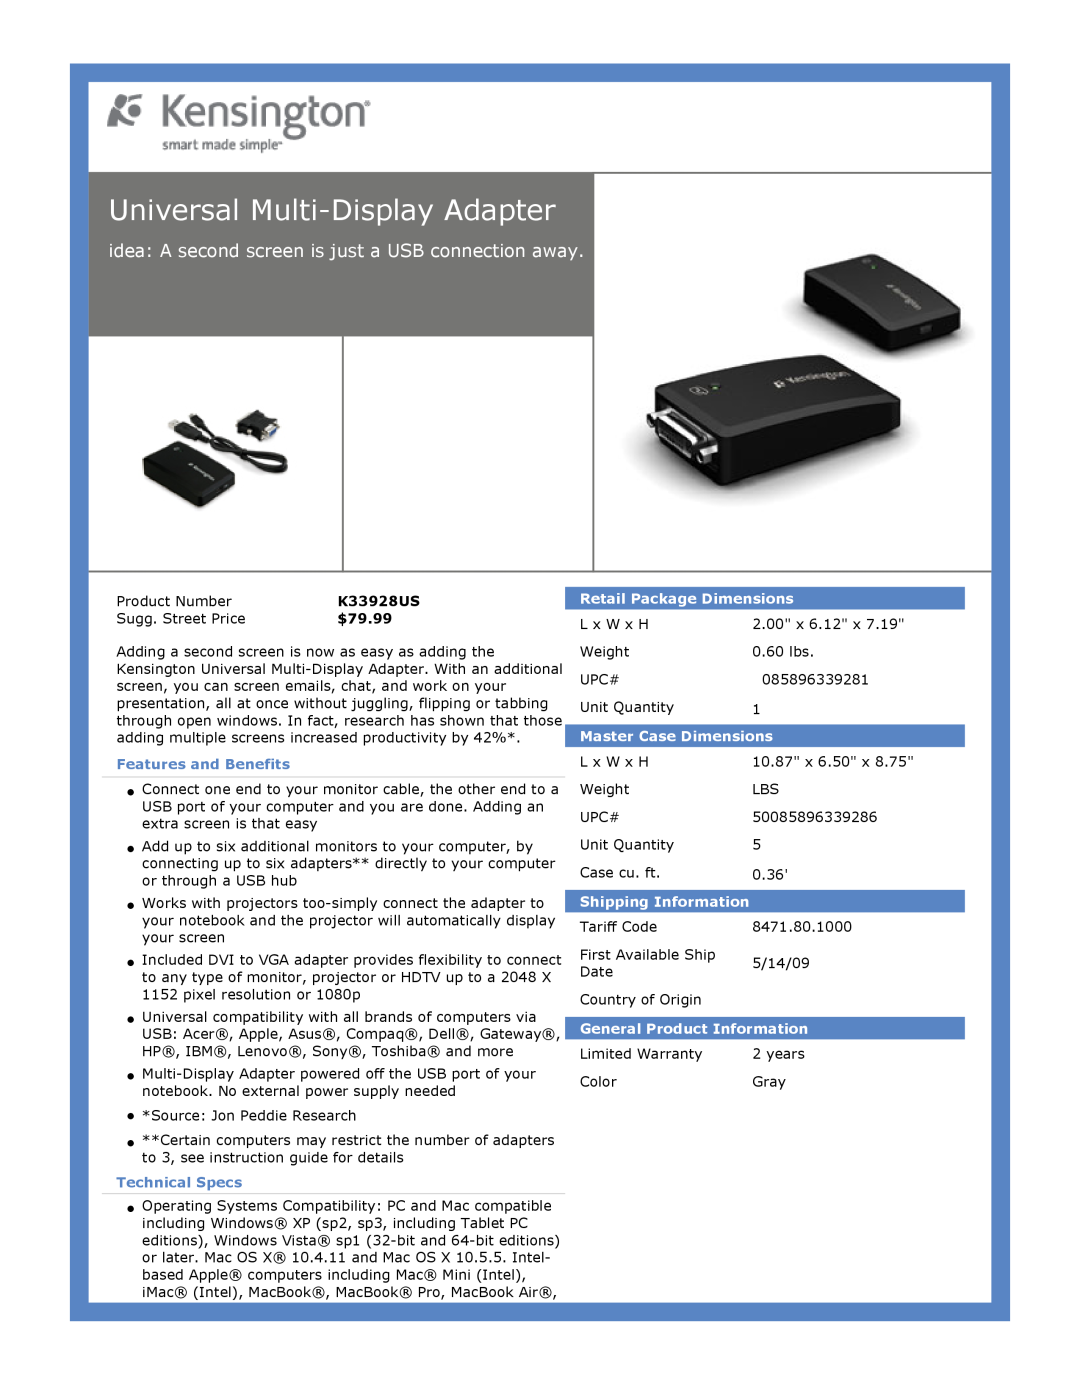 Kensington EU64325 Universal Multi-DisplayAdapter, $79.99, Features and Benefits, Technical Specs, Master Case Dimensions 